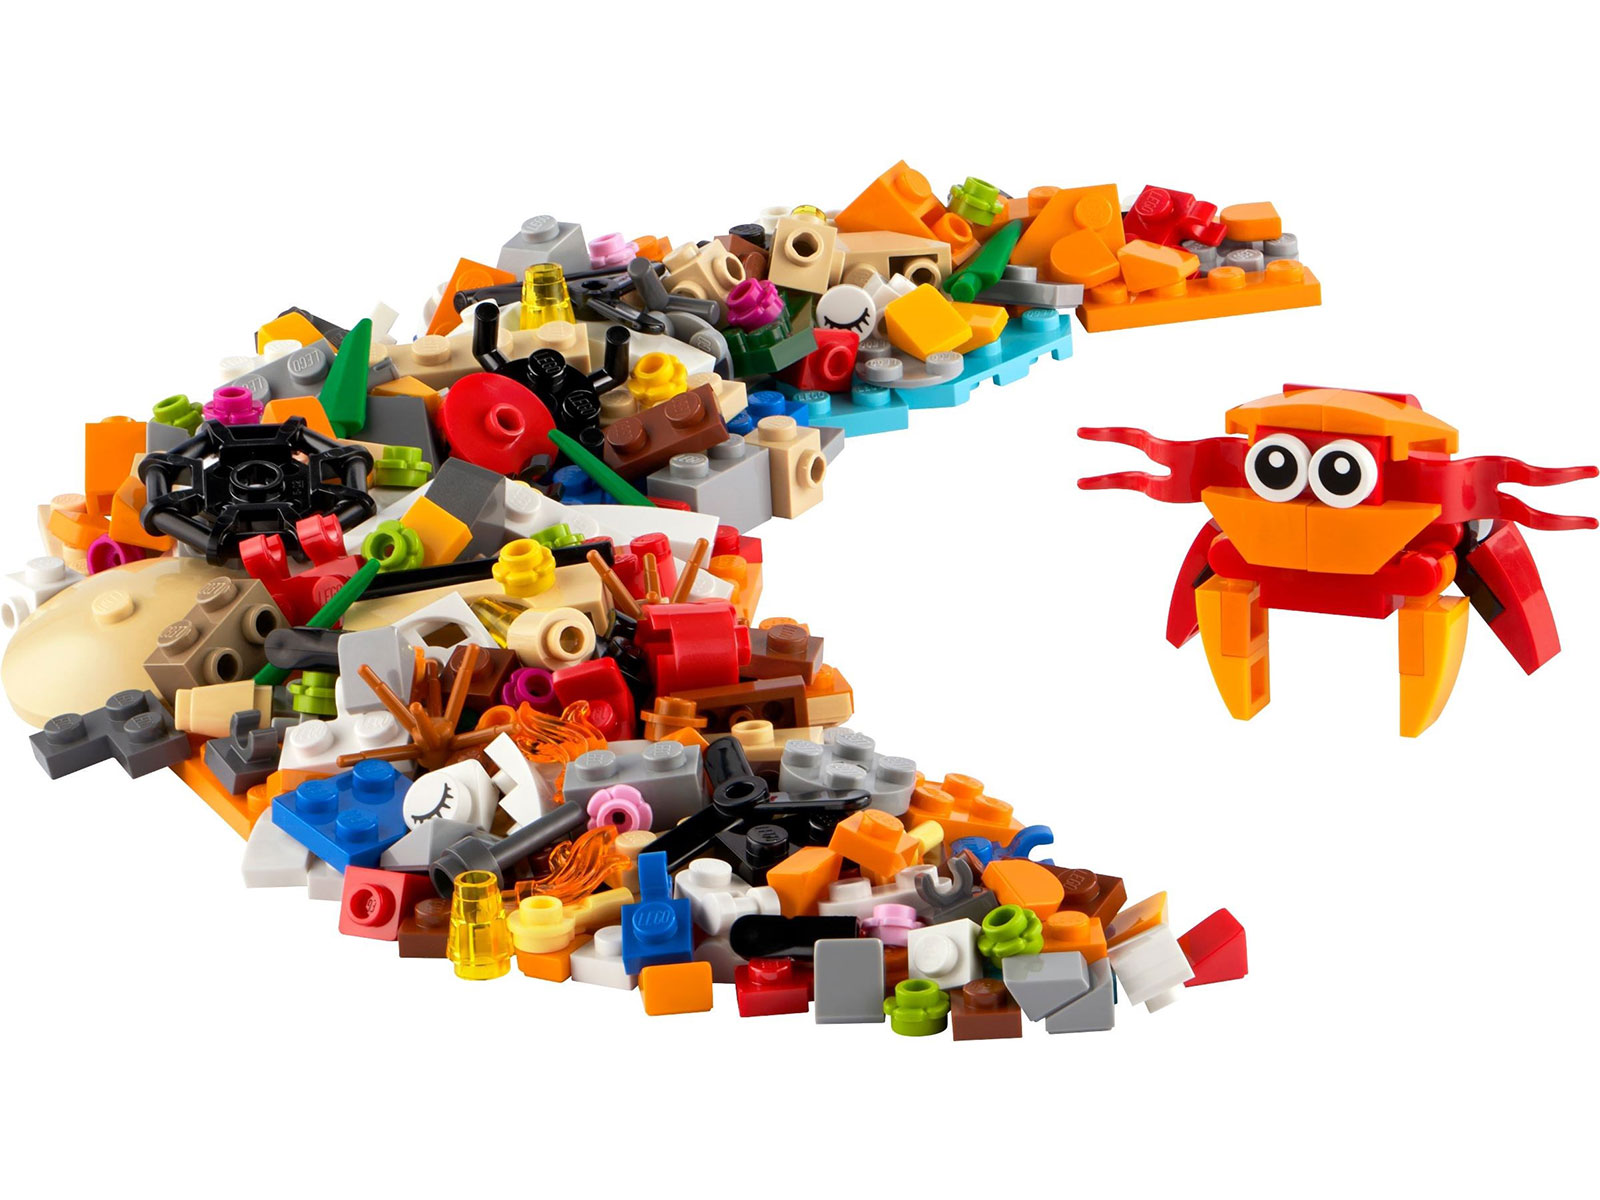 LEGO® 40593 - 12-in-1-Kreativbox